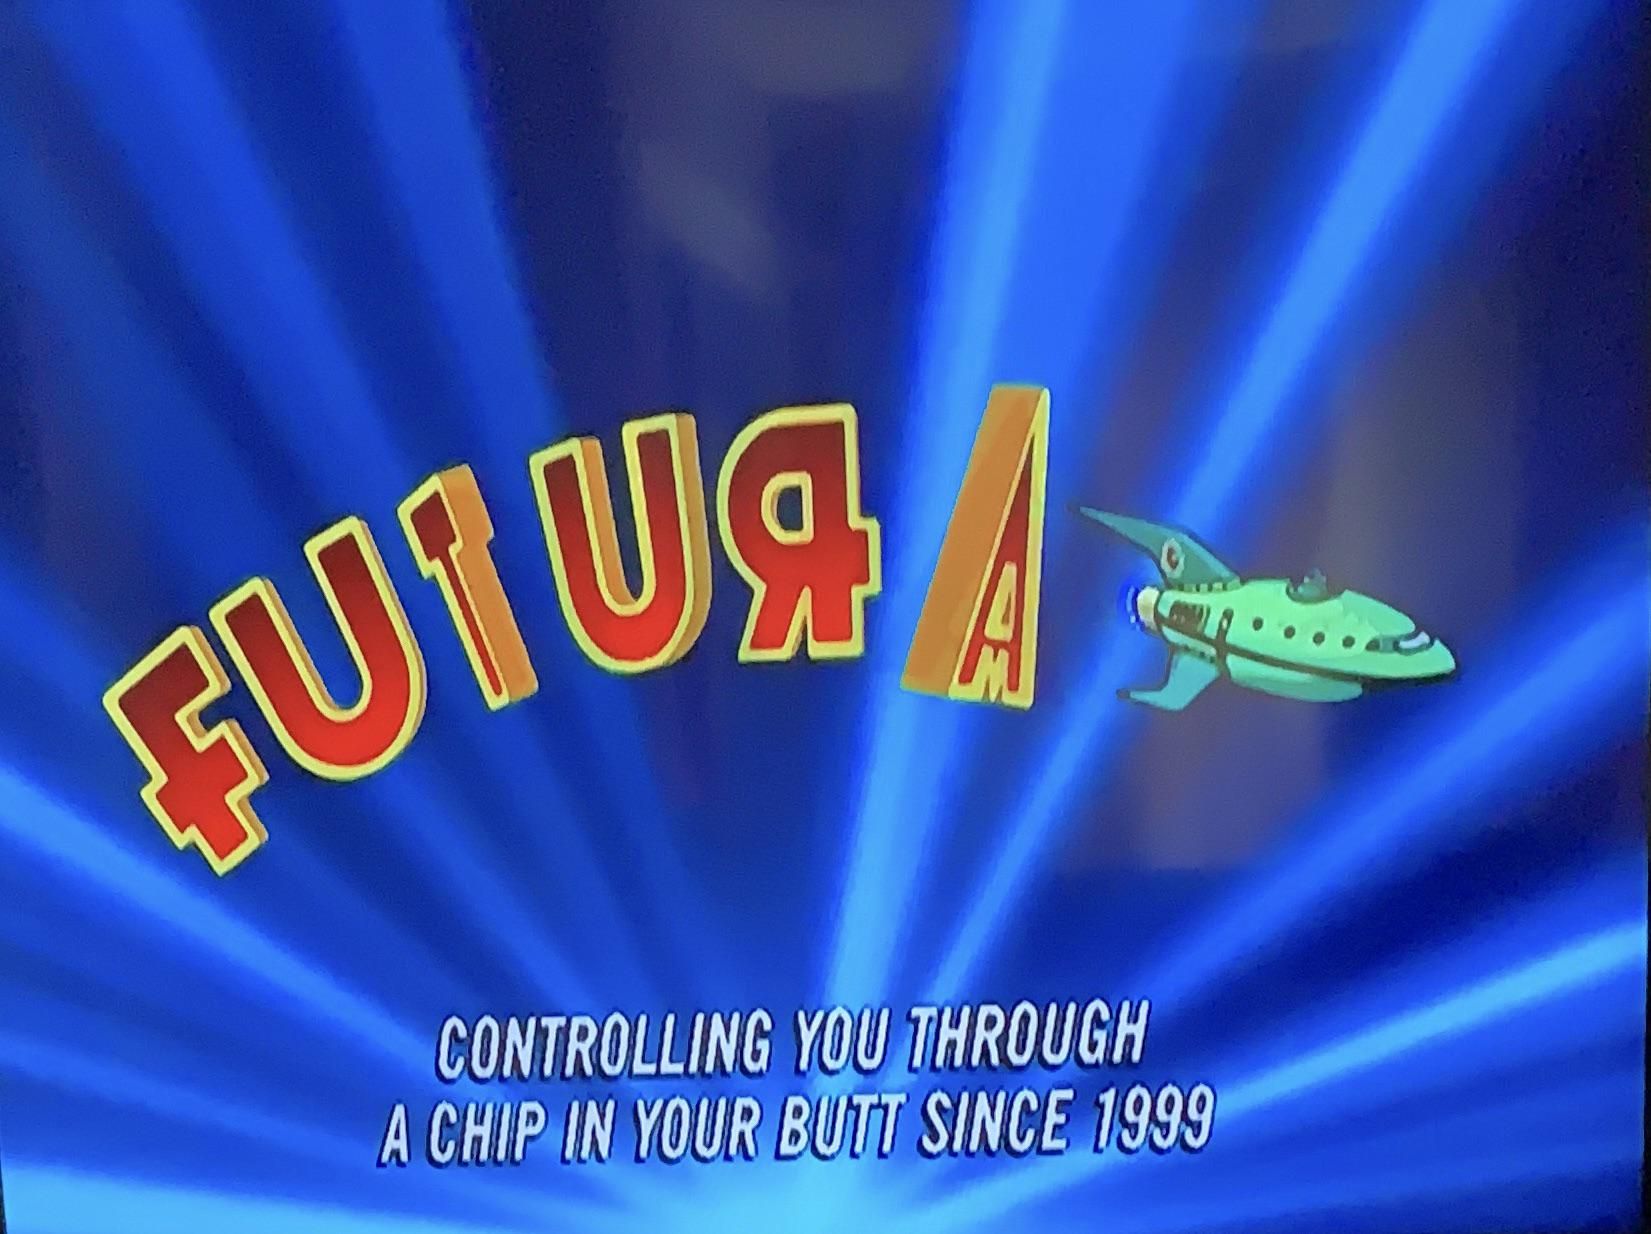 Futurama was a show ahead of its time